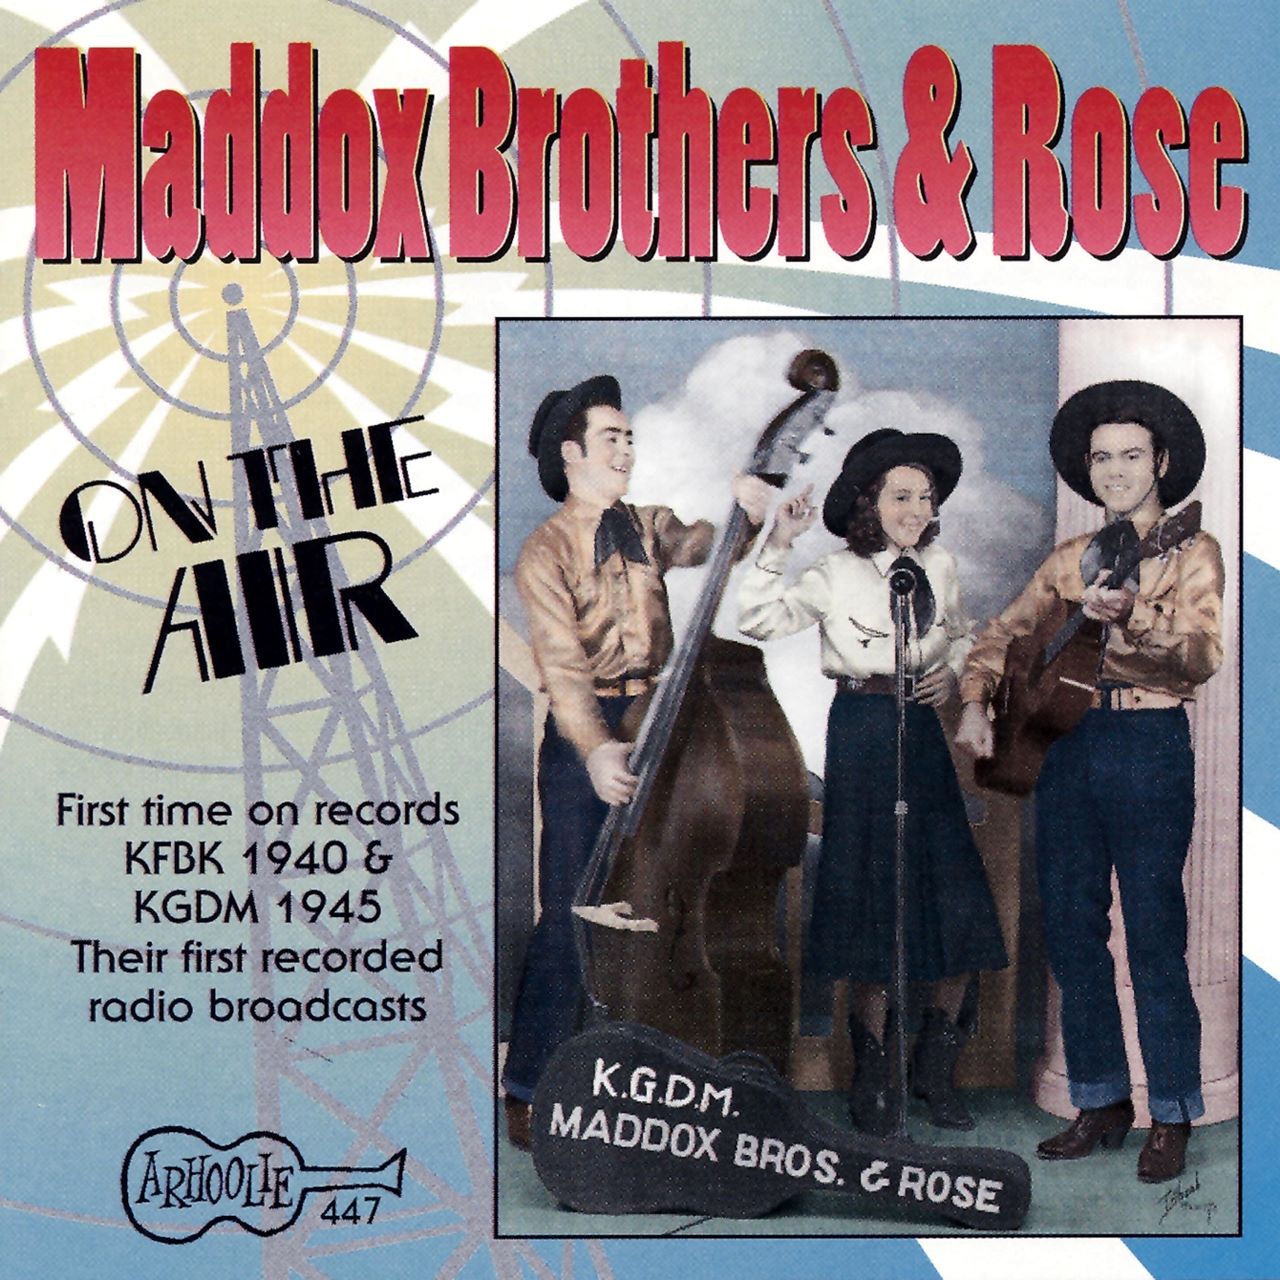 Maddox Brothers & Rose - On The Air cover album